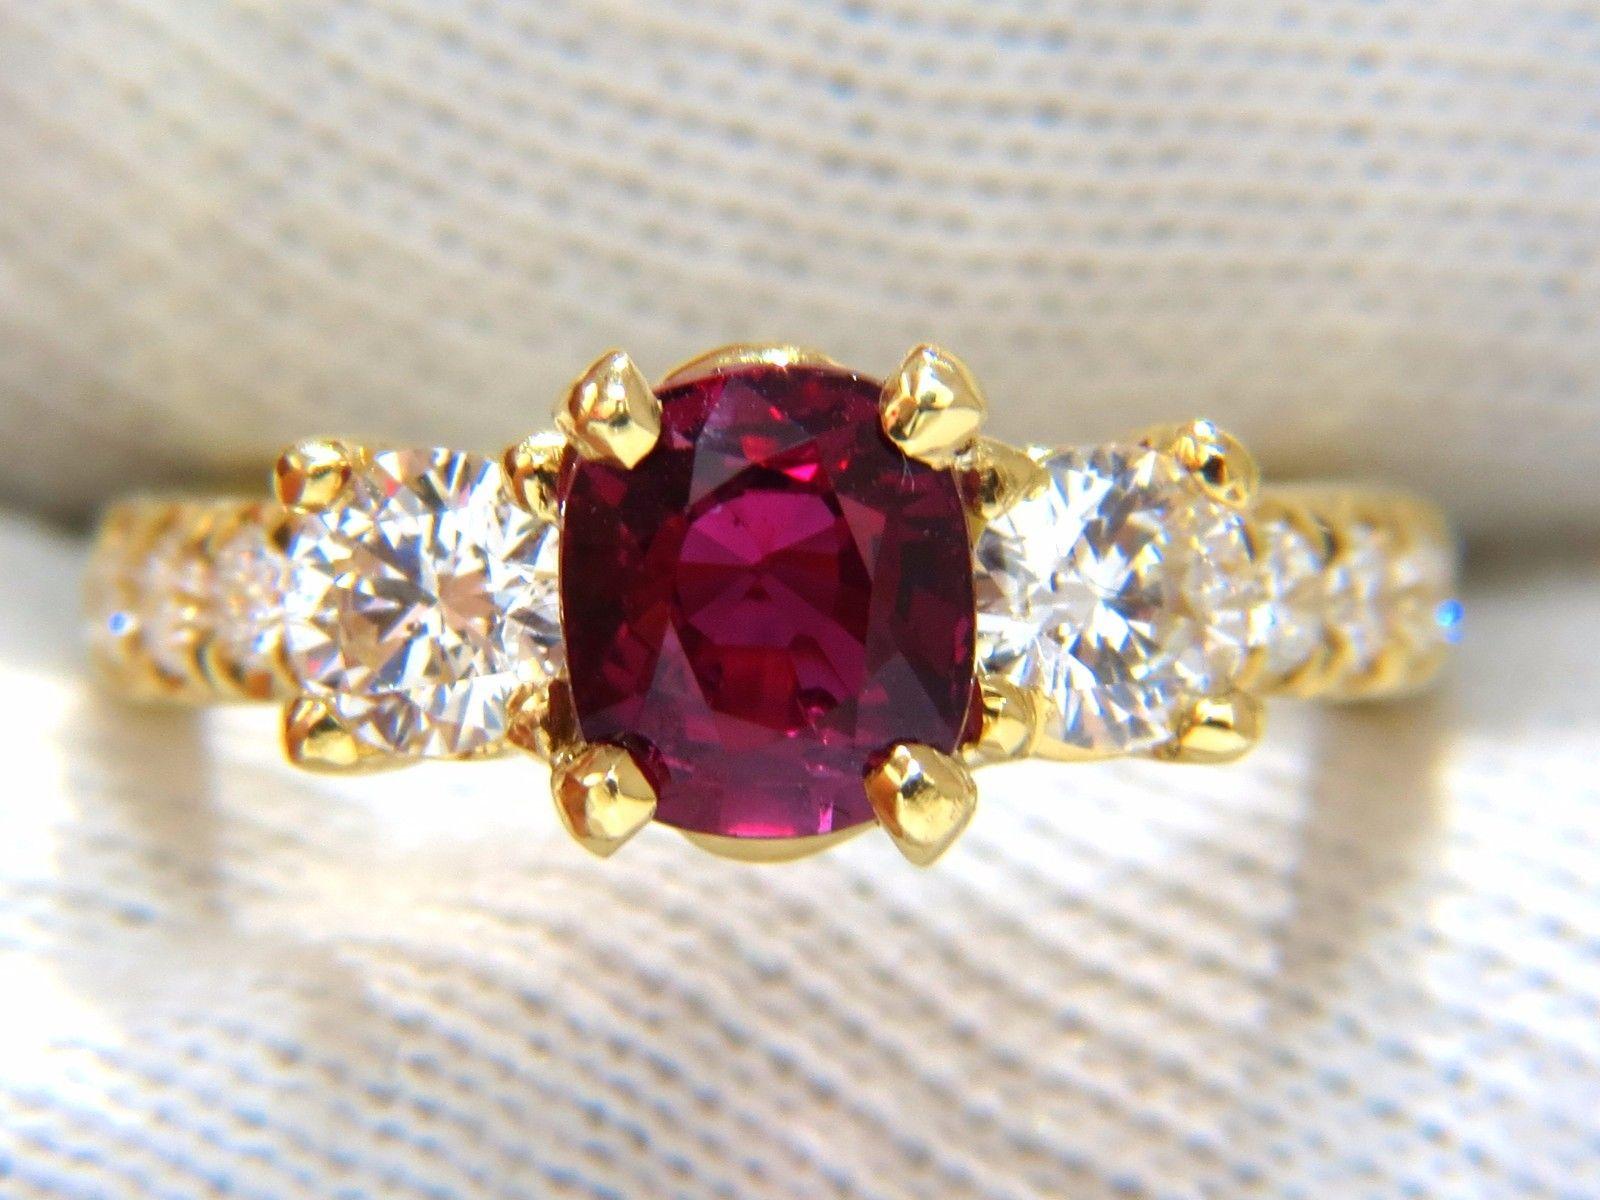 GIA Certified 2.12ct cushion cut vivid red ruby 1.06ct diamonds ring 18kt For Sale 2